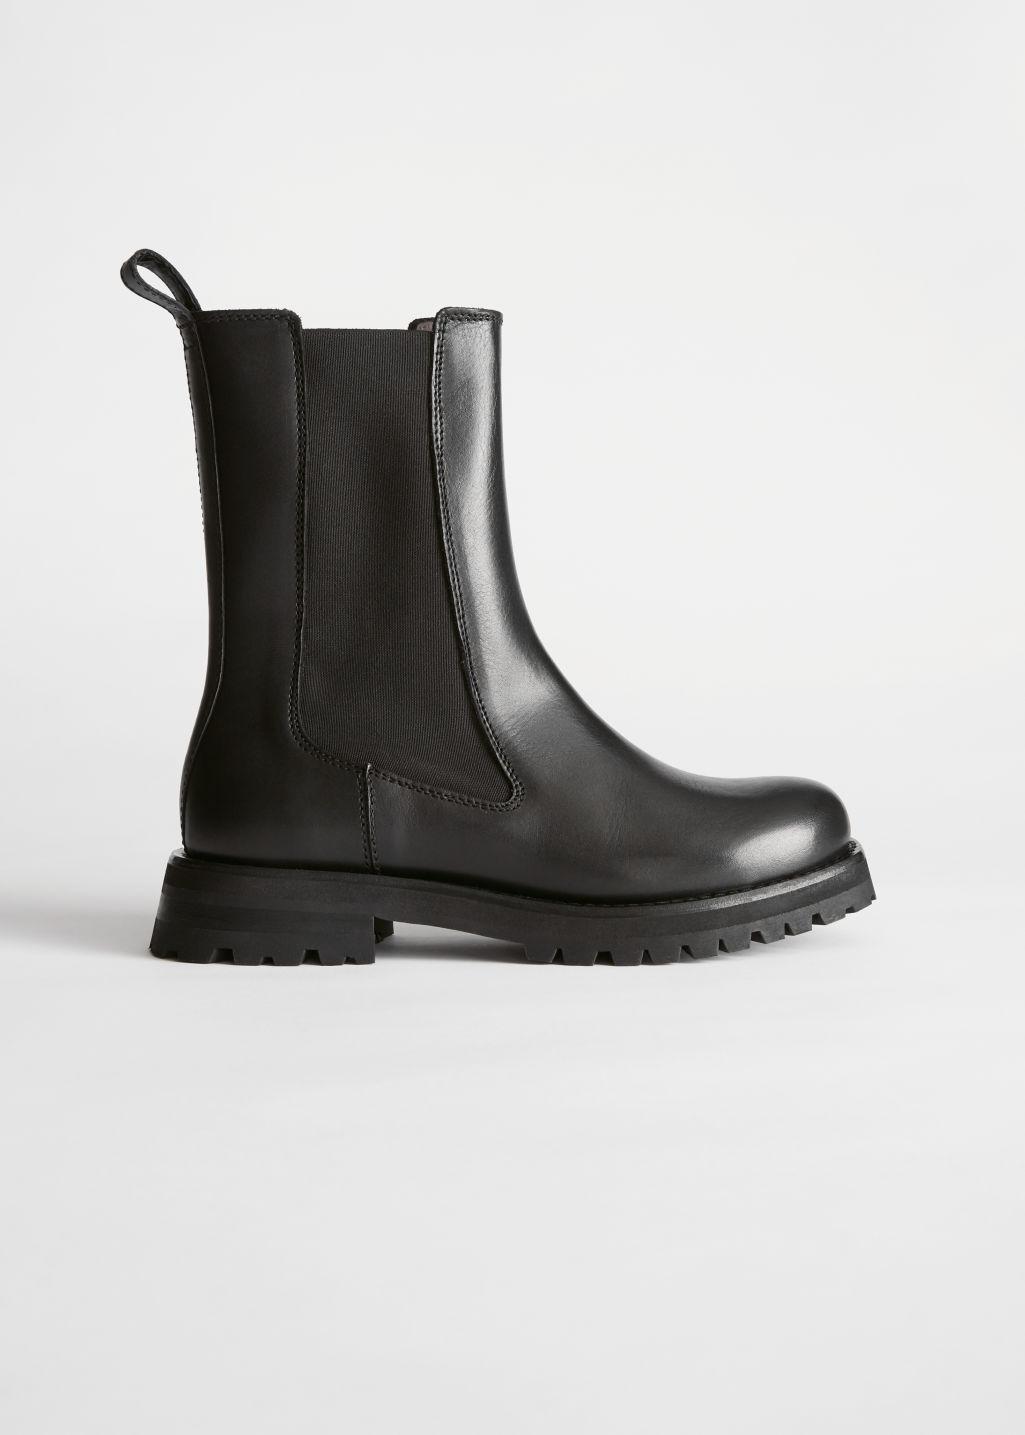 & Other Stories Chunky Sole Leather Chelsea Boots in Black - Lyst